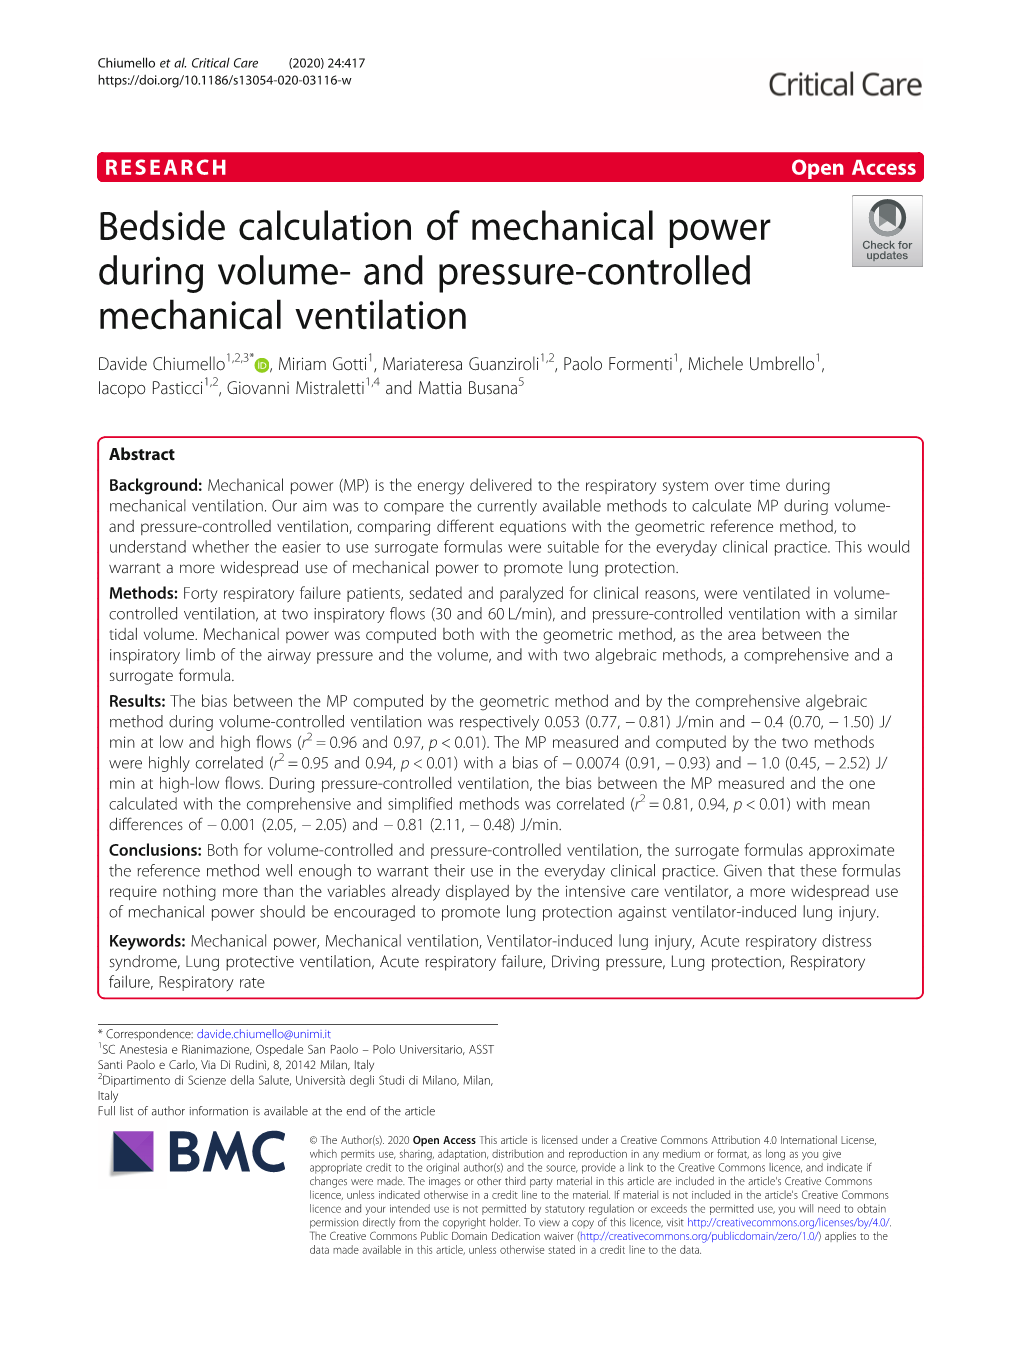 Bedside Calculation of Mechanical Power During Volume